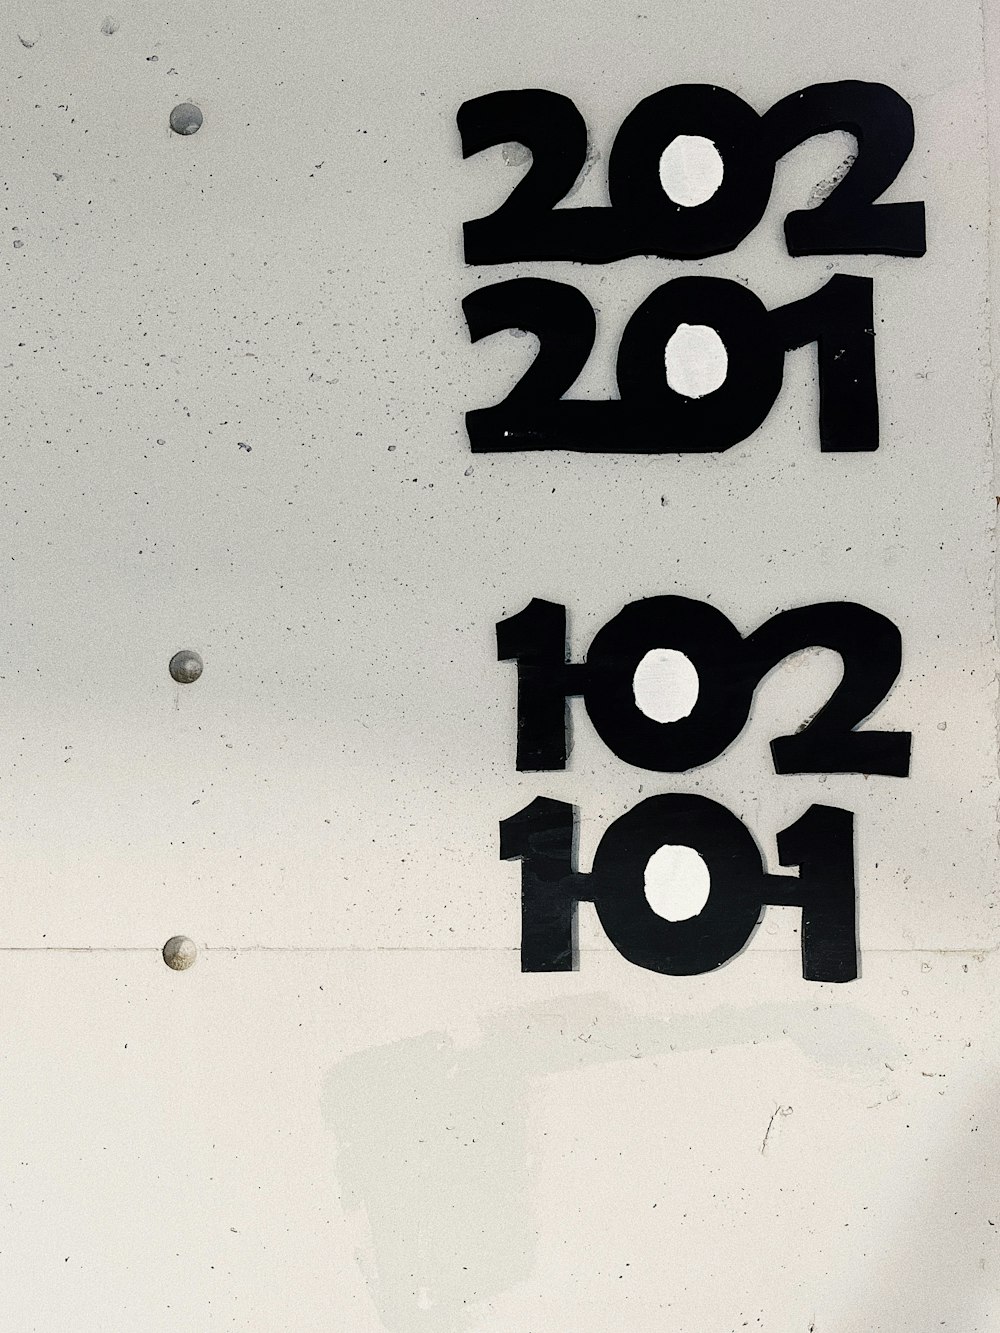 the numbers are written on the side of a building